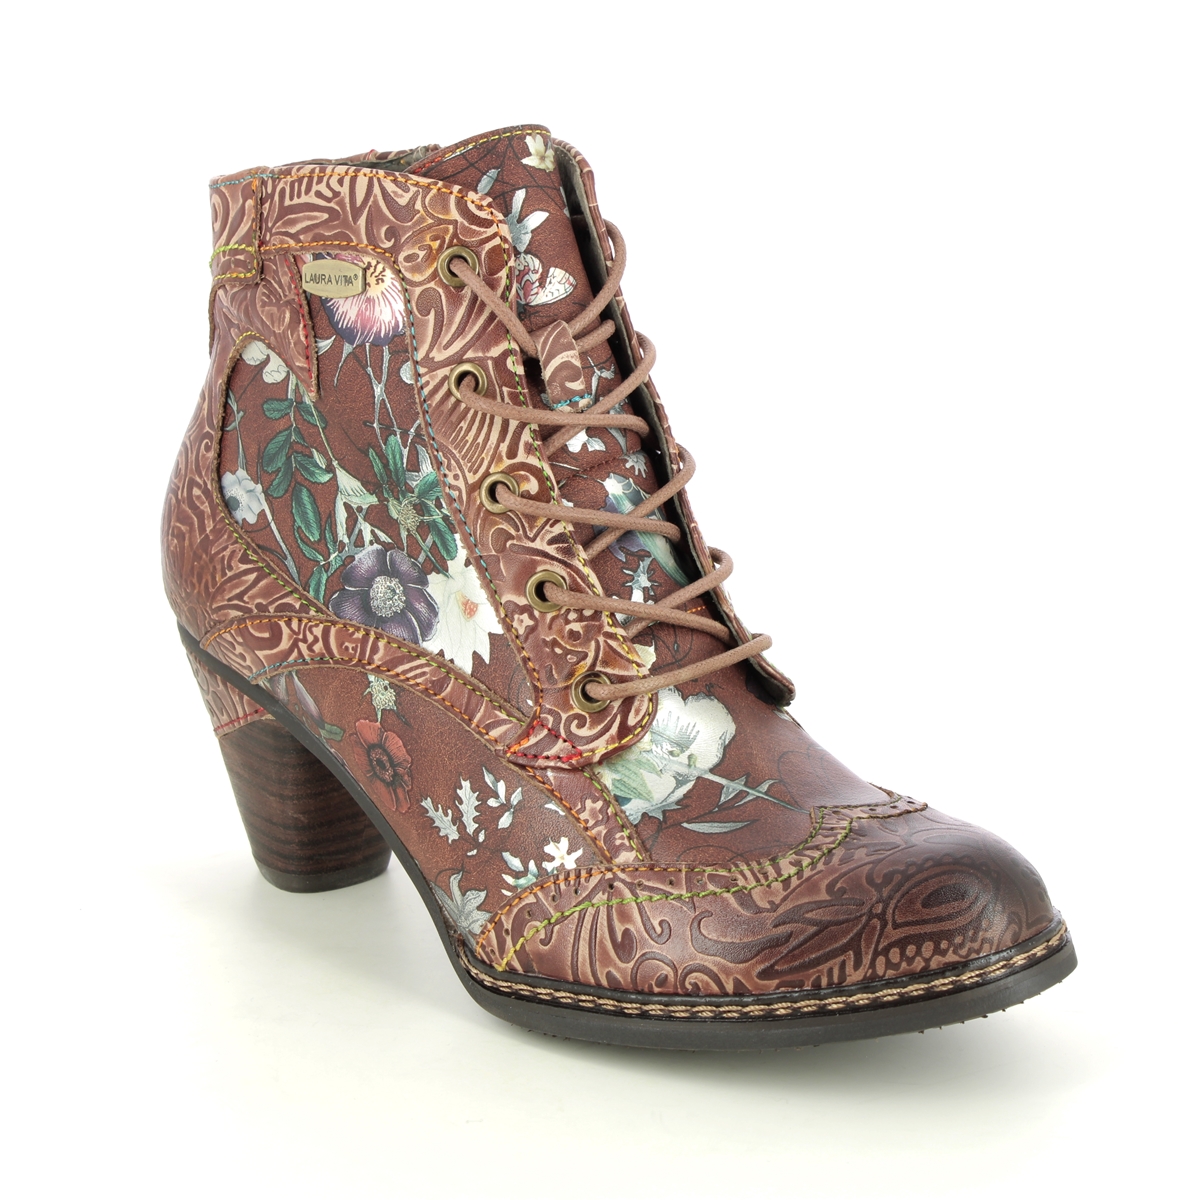 Laura Vita - Alcizeeo 01 (Tan Leather) 4495-15 In Size 41 In Floral Tan Leather